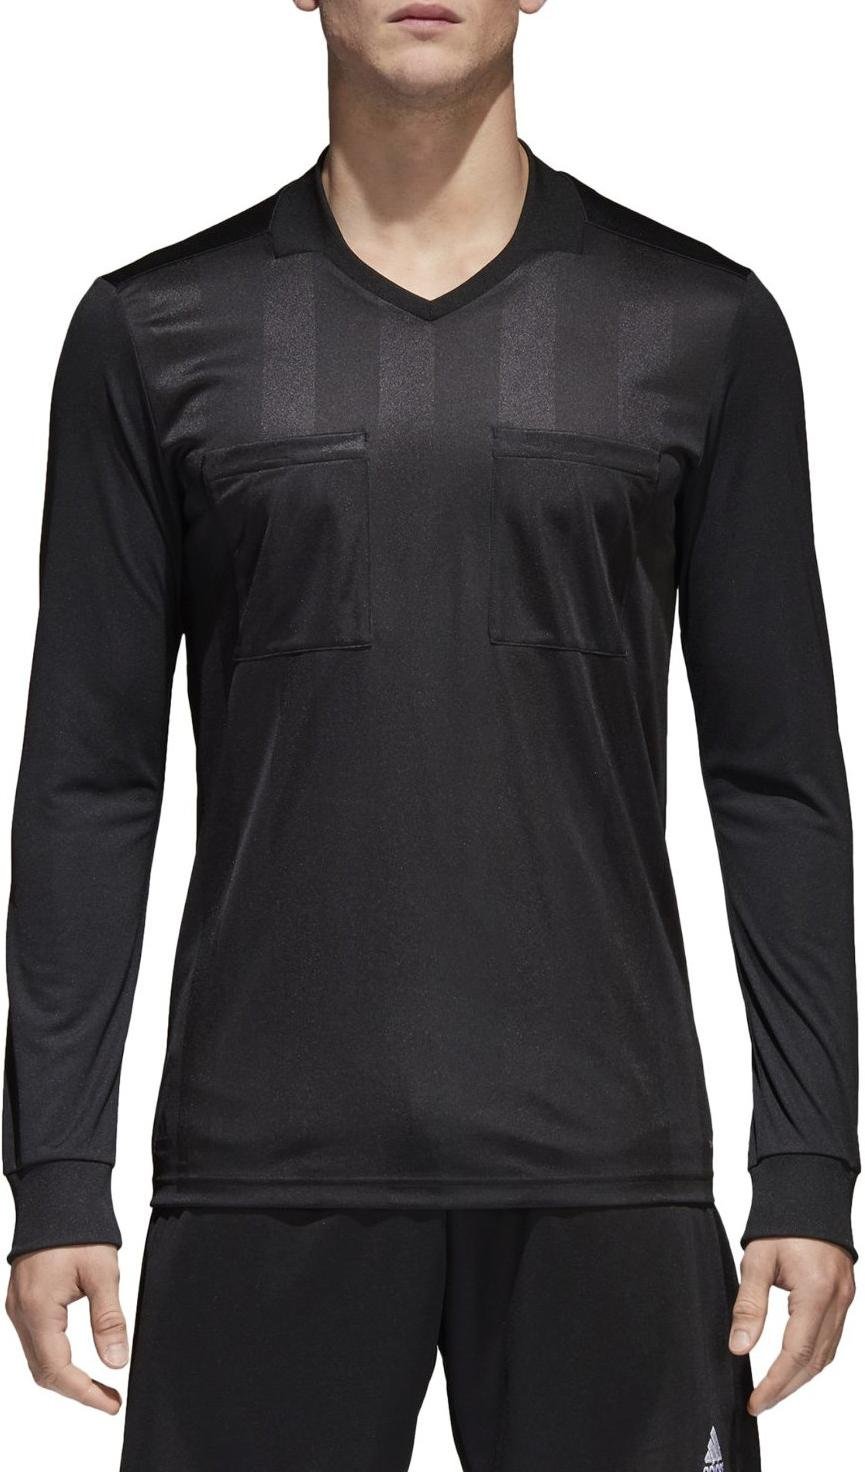 Maillot à manches longues adidas referee 18